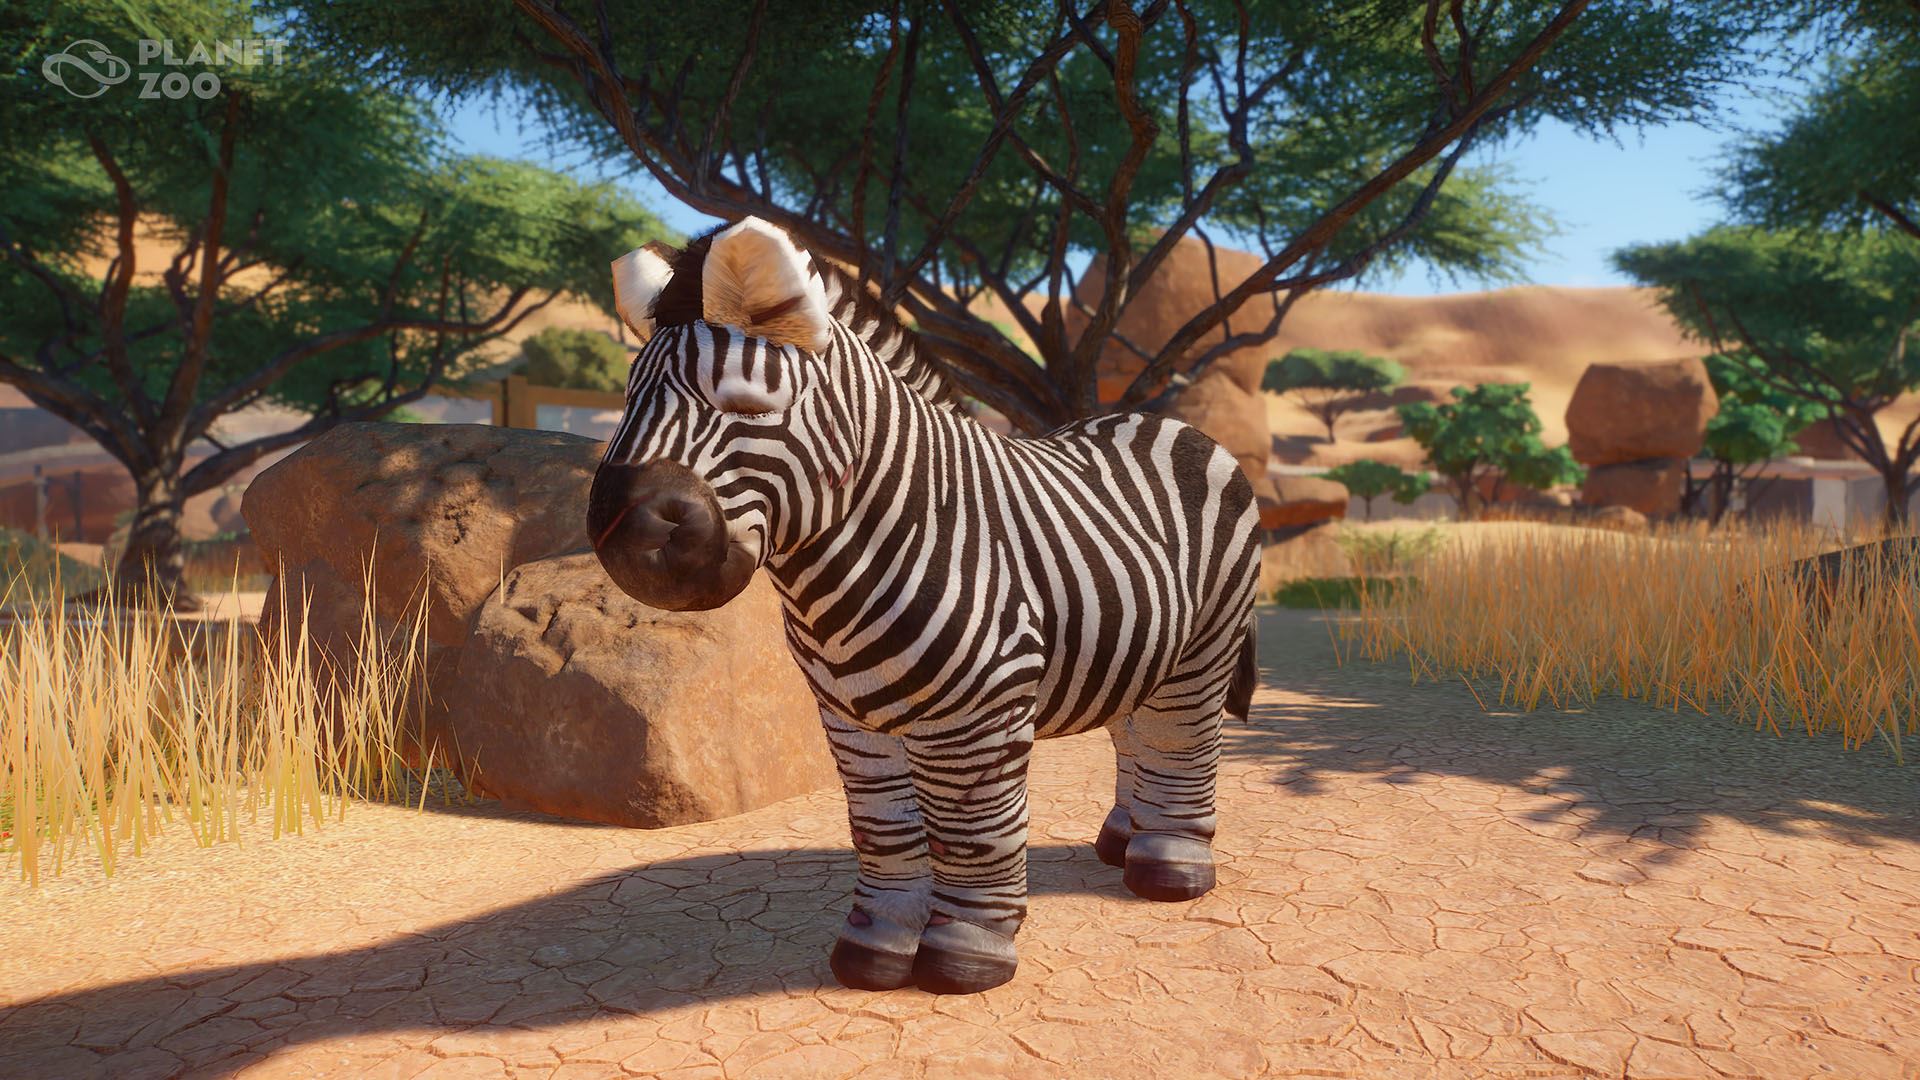 planet zoo pc download